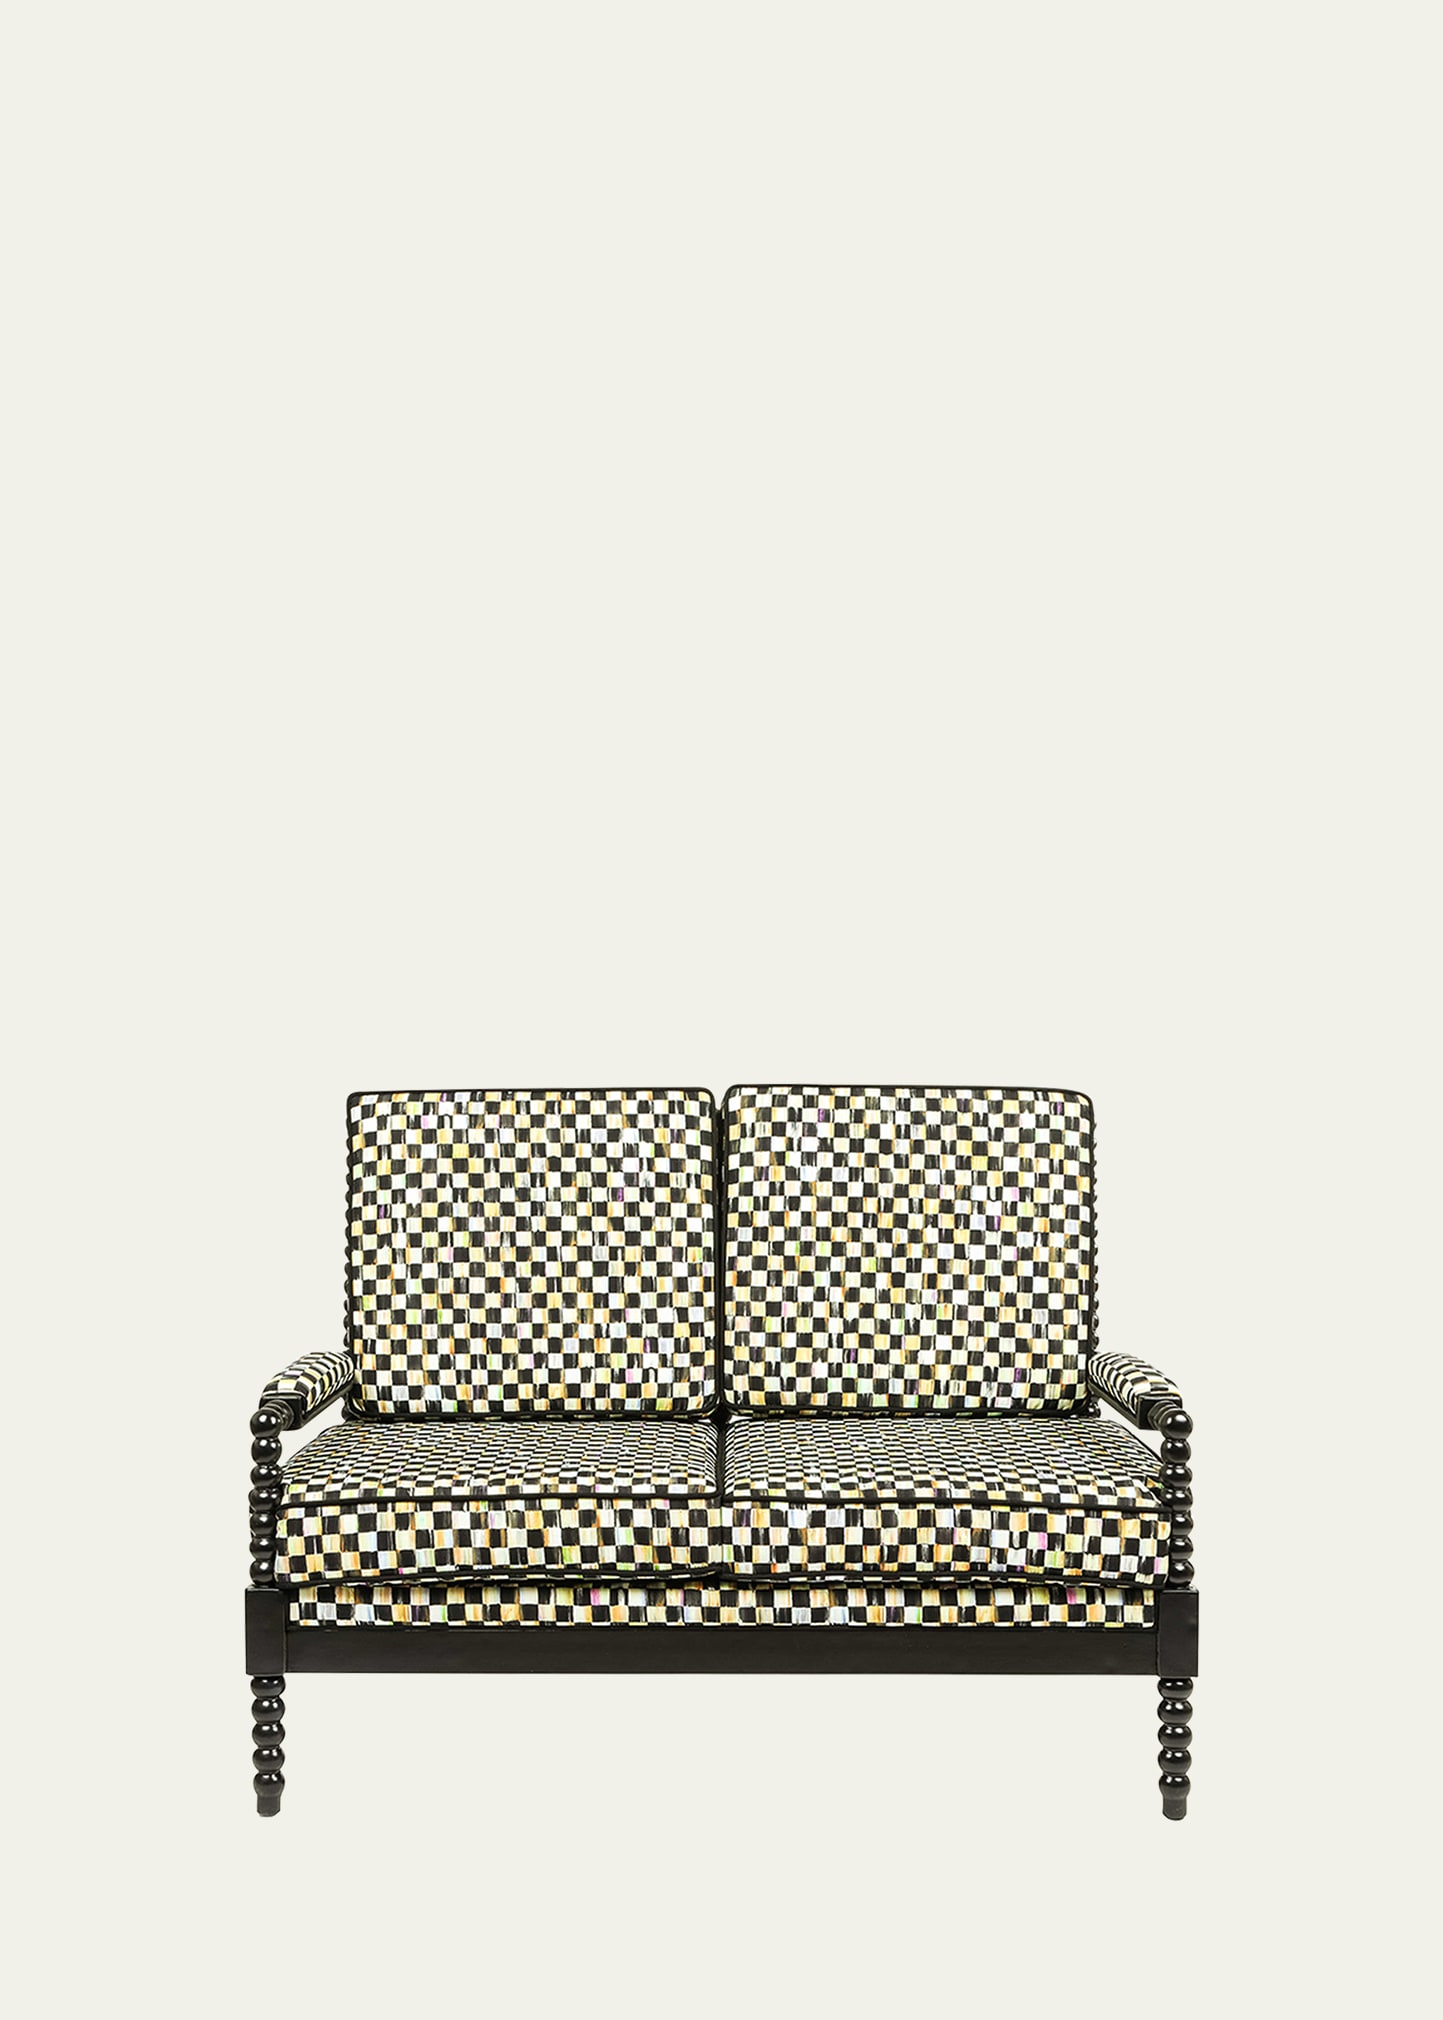 Mackenzie-childs Spindle Check Outdoor Settee In Black